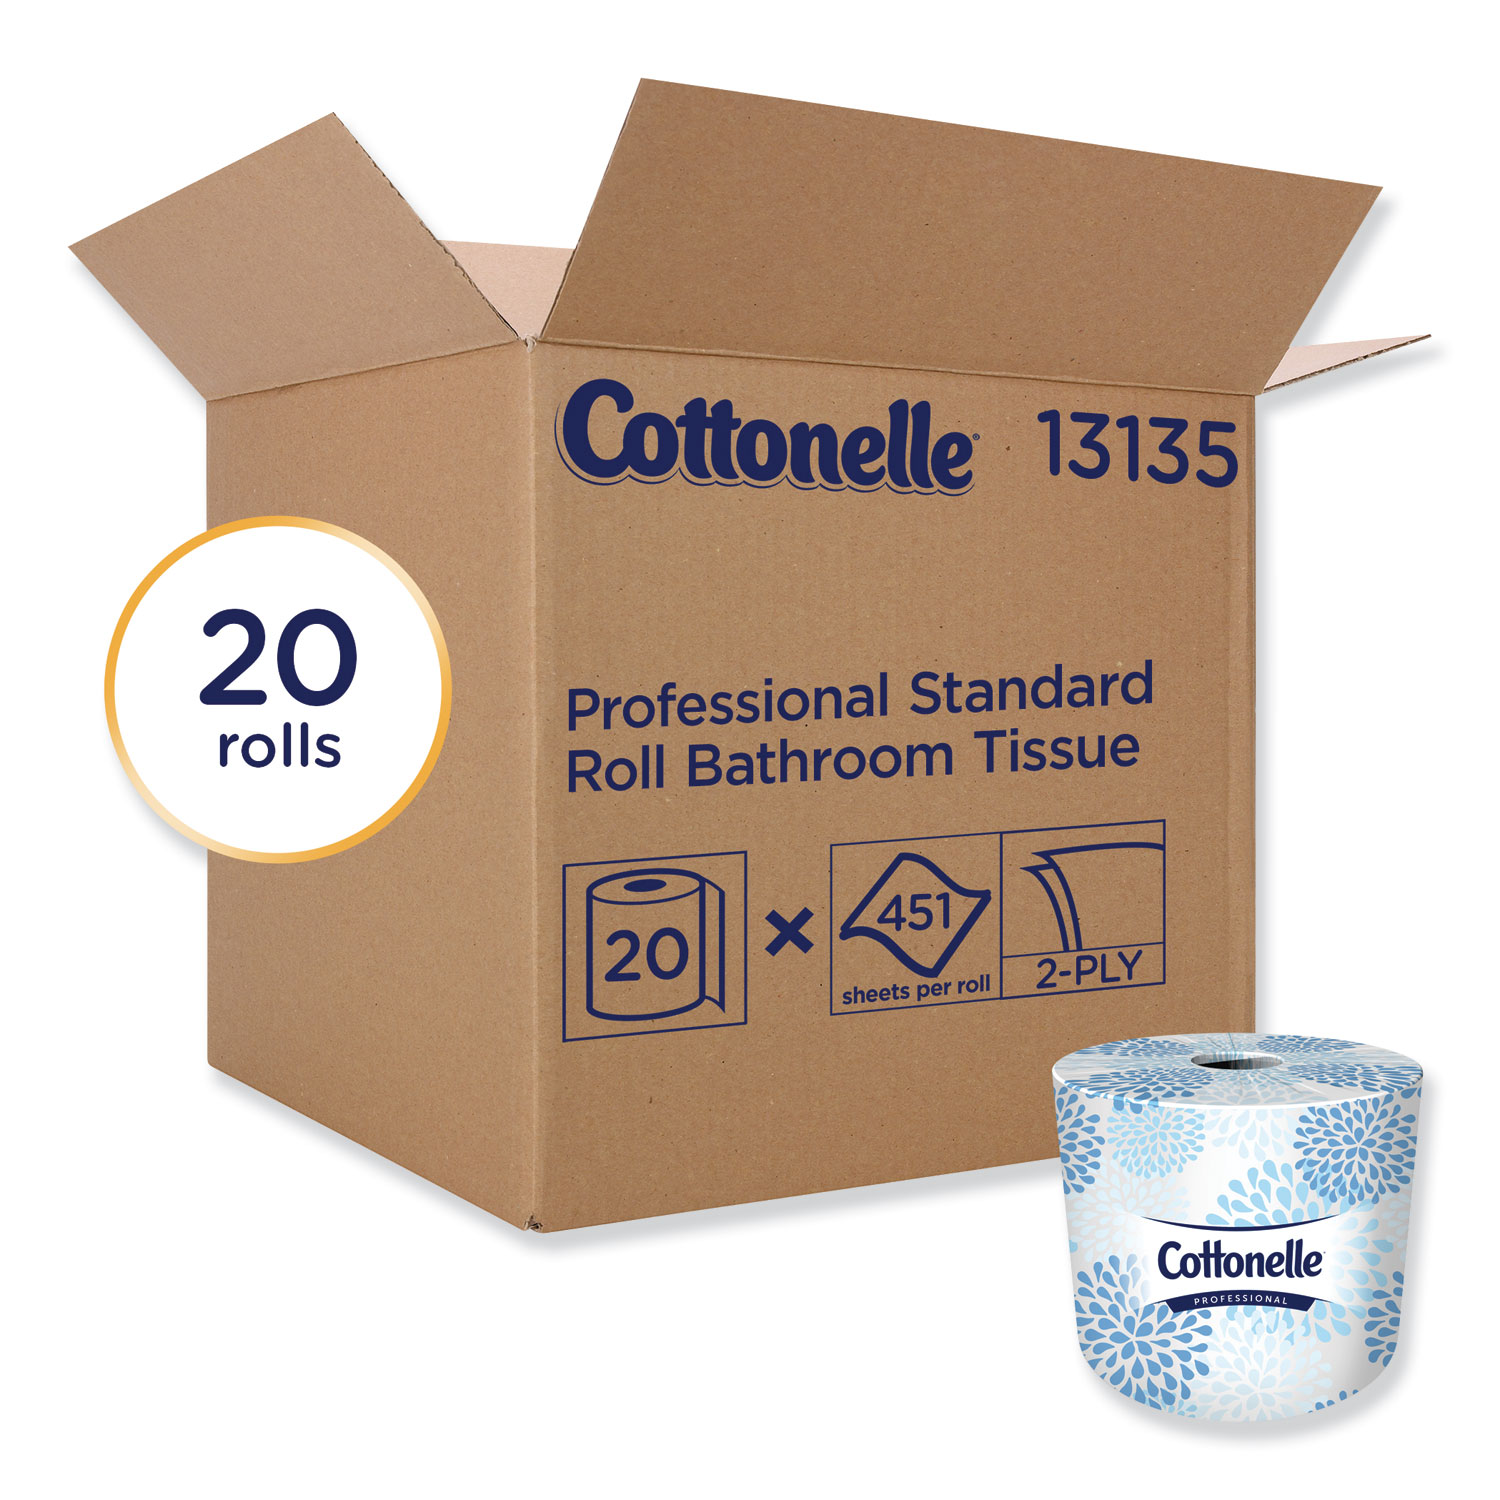  Cottonelle 13135 Two-Ply Bathroom Tissue,Septic Safe, White, 451 Sheets/Roll, 20 Rolls/Carton (KCC13135) 